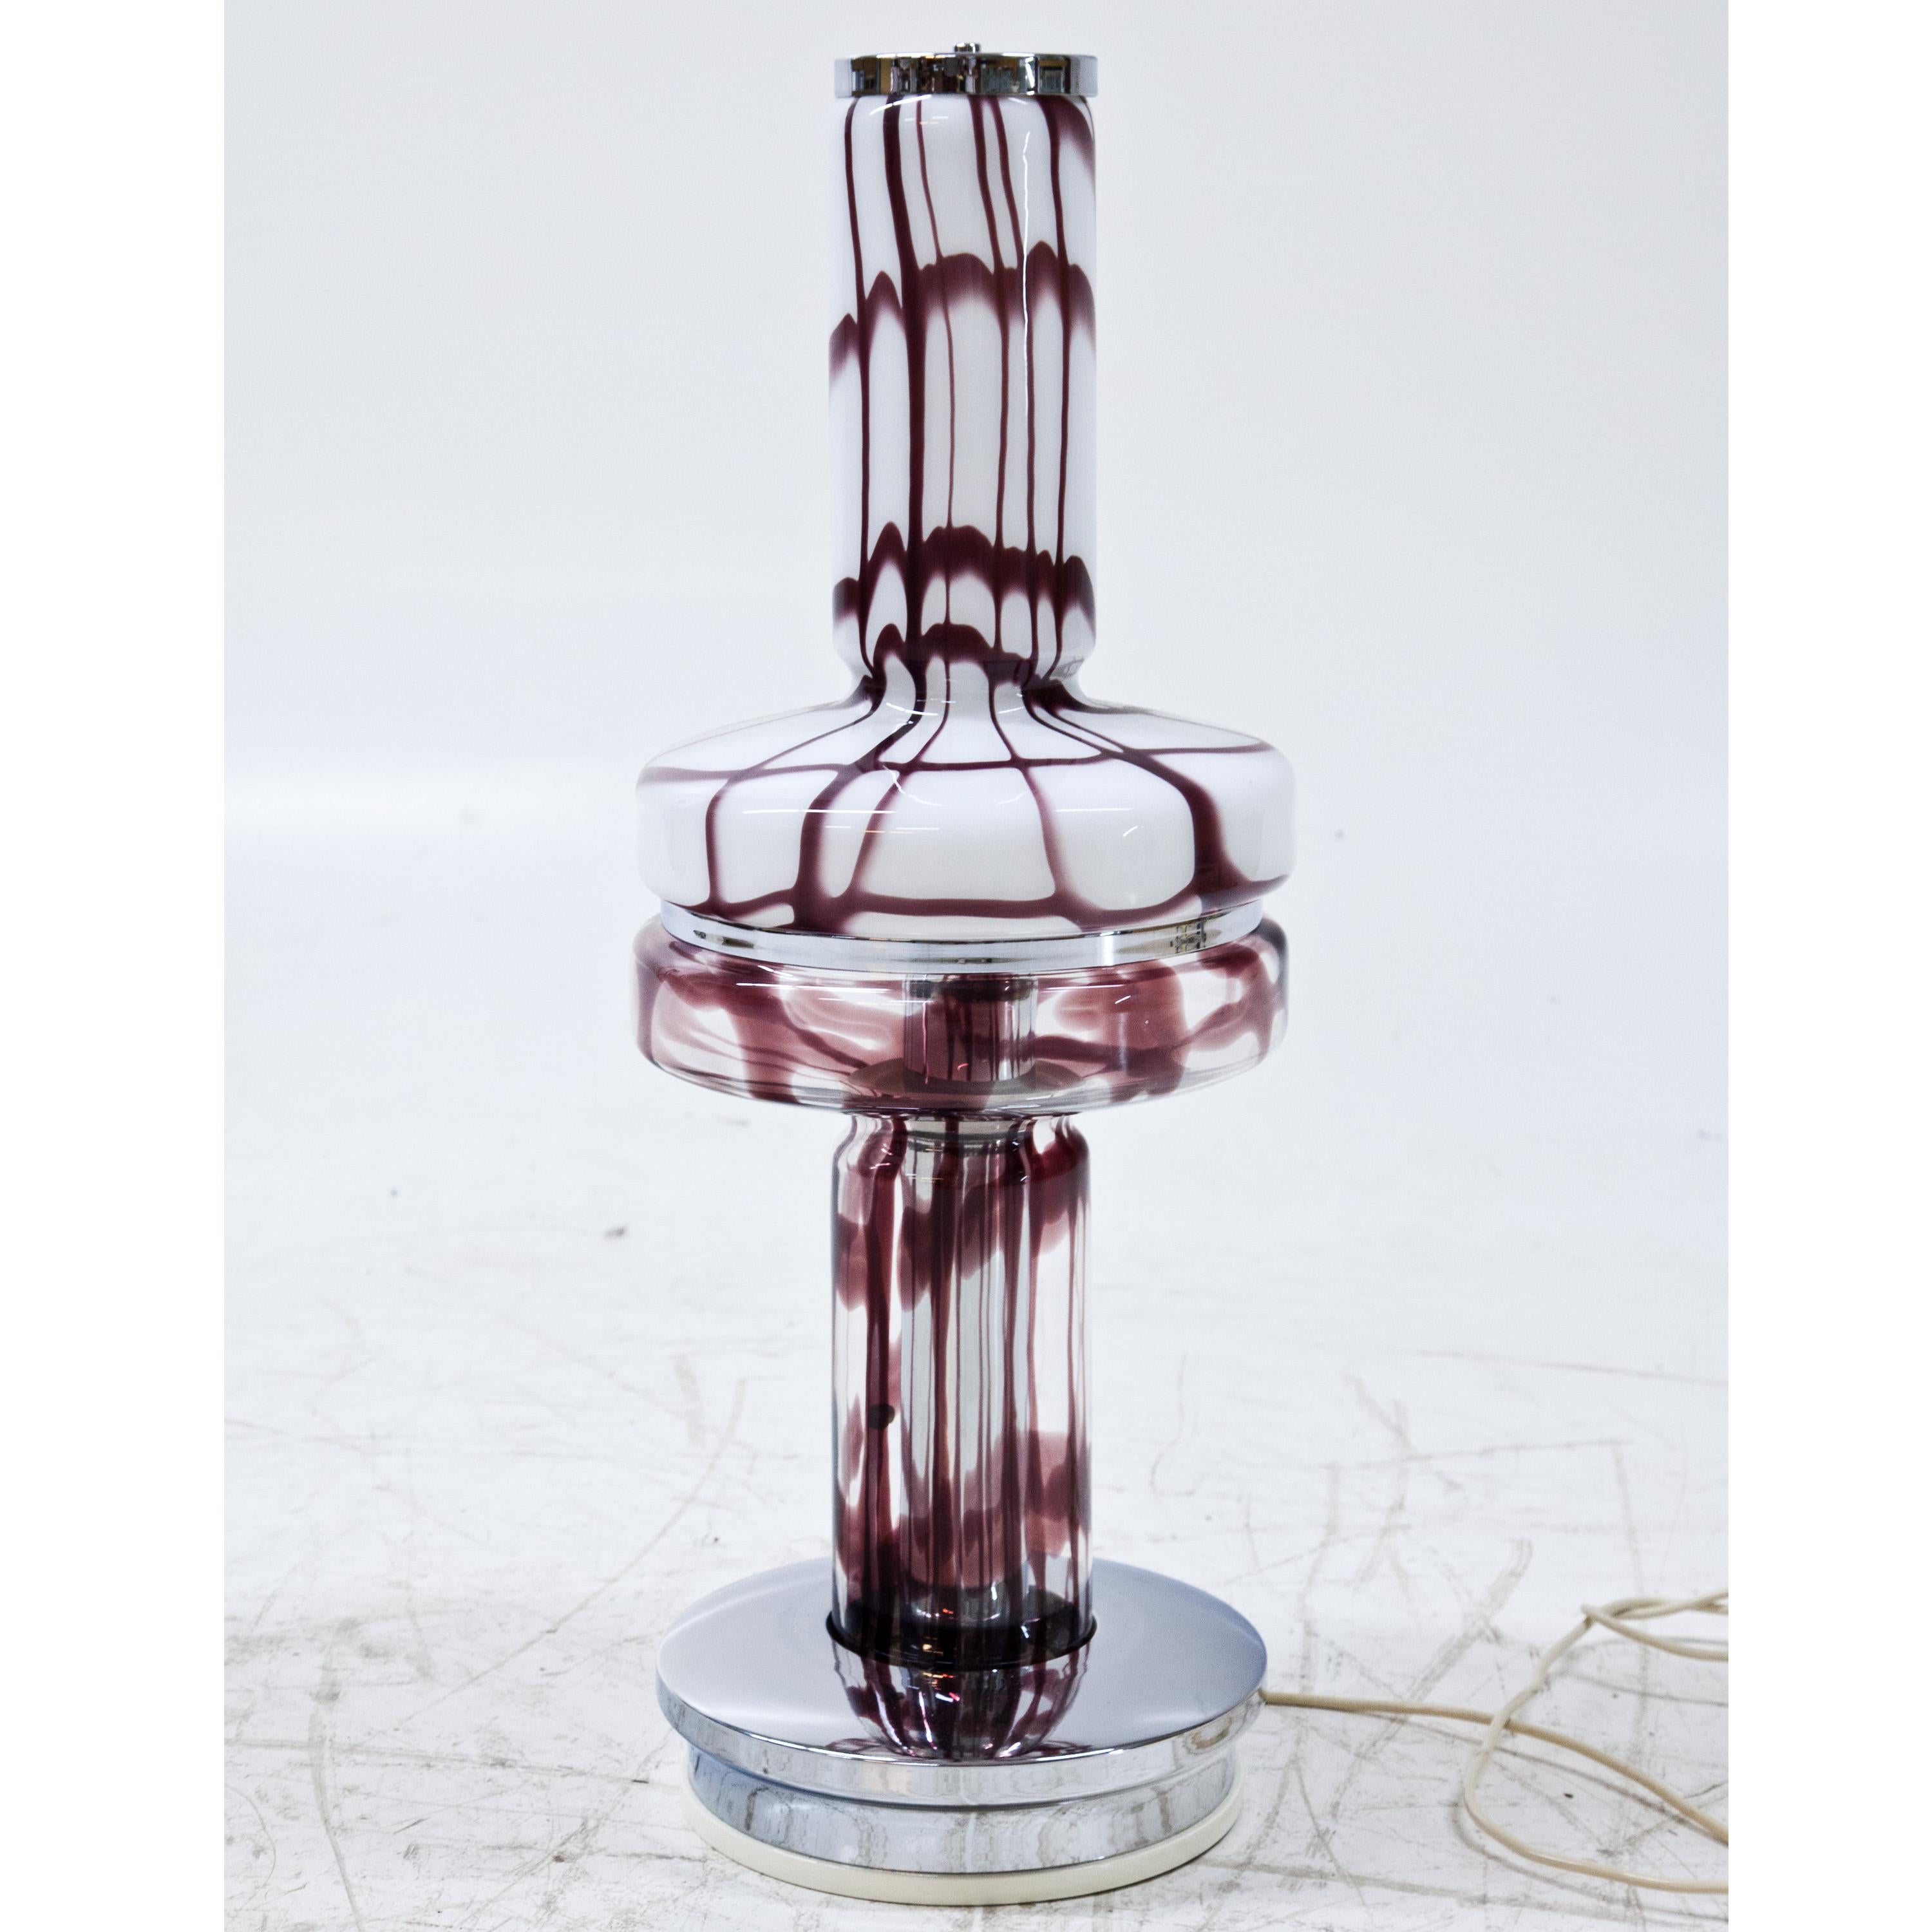 Table lamp by Angelo Brotto out of purple and white Murano glass on top and purple and transparent Murano glass at the bottom, as well as chromed elements. The lamps stand on a round base and were rewired. Label by Esperia and Murano on the glass